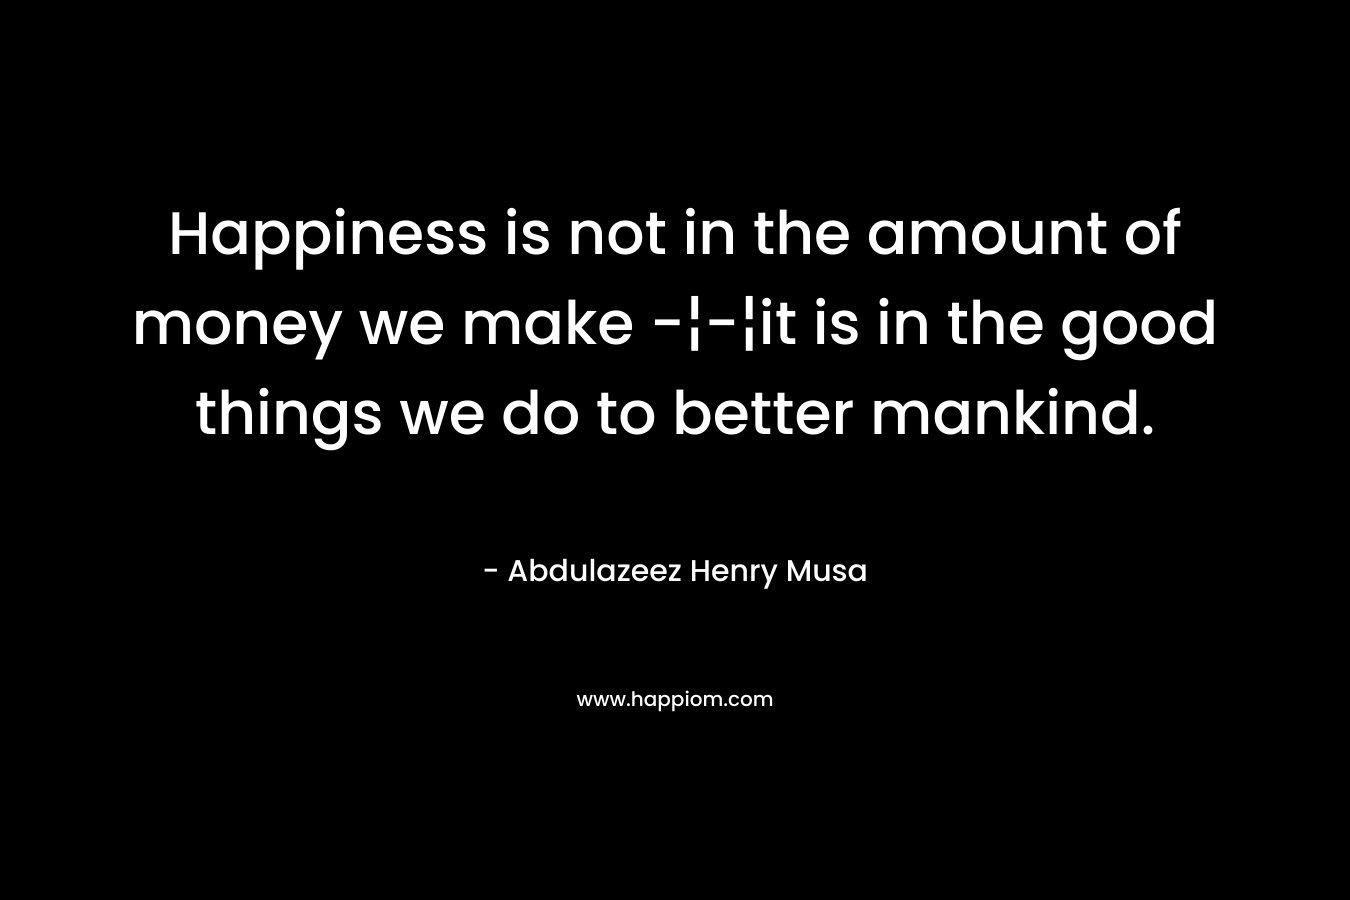 Happiness is not in the amount of money we make -¦-¦it is in the good things we do to better mankind.